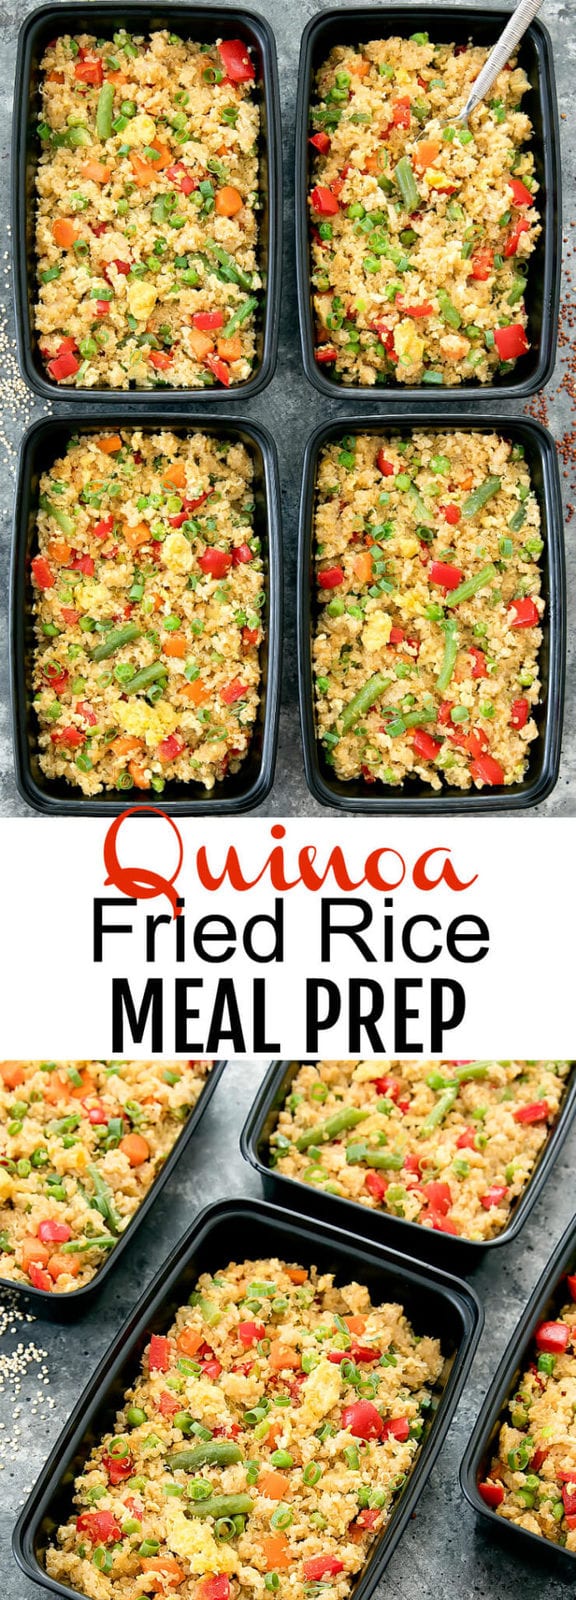 Quinoa Fried Rice Weekly Meal Prep